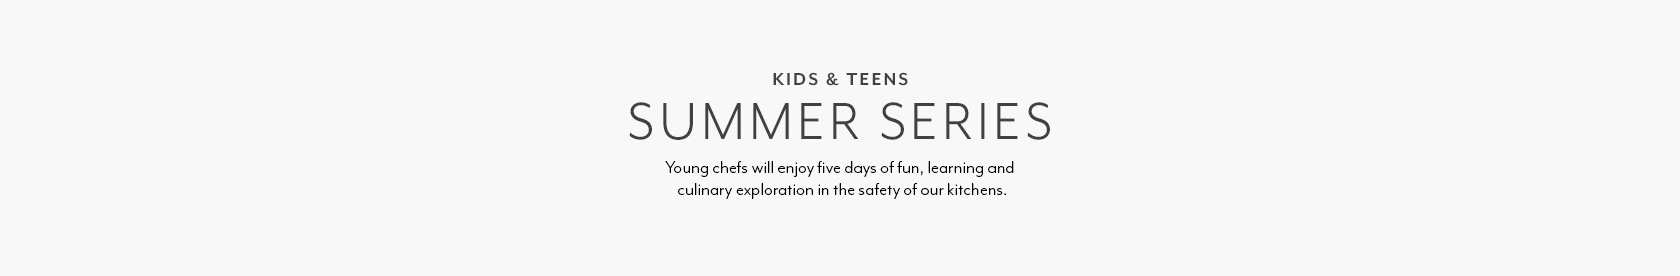 KIDS & TEENS SUMMER SERIES. Young chefs will enjoy five days of fun, learning and culinary exploration in the safety of our kitchens.